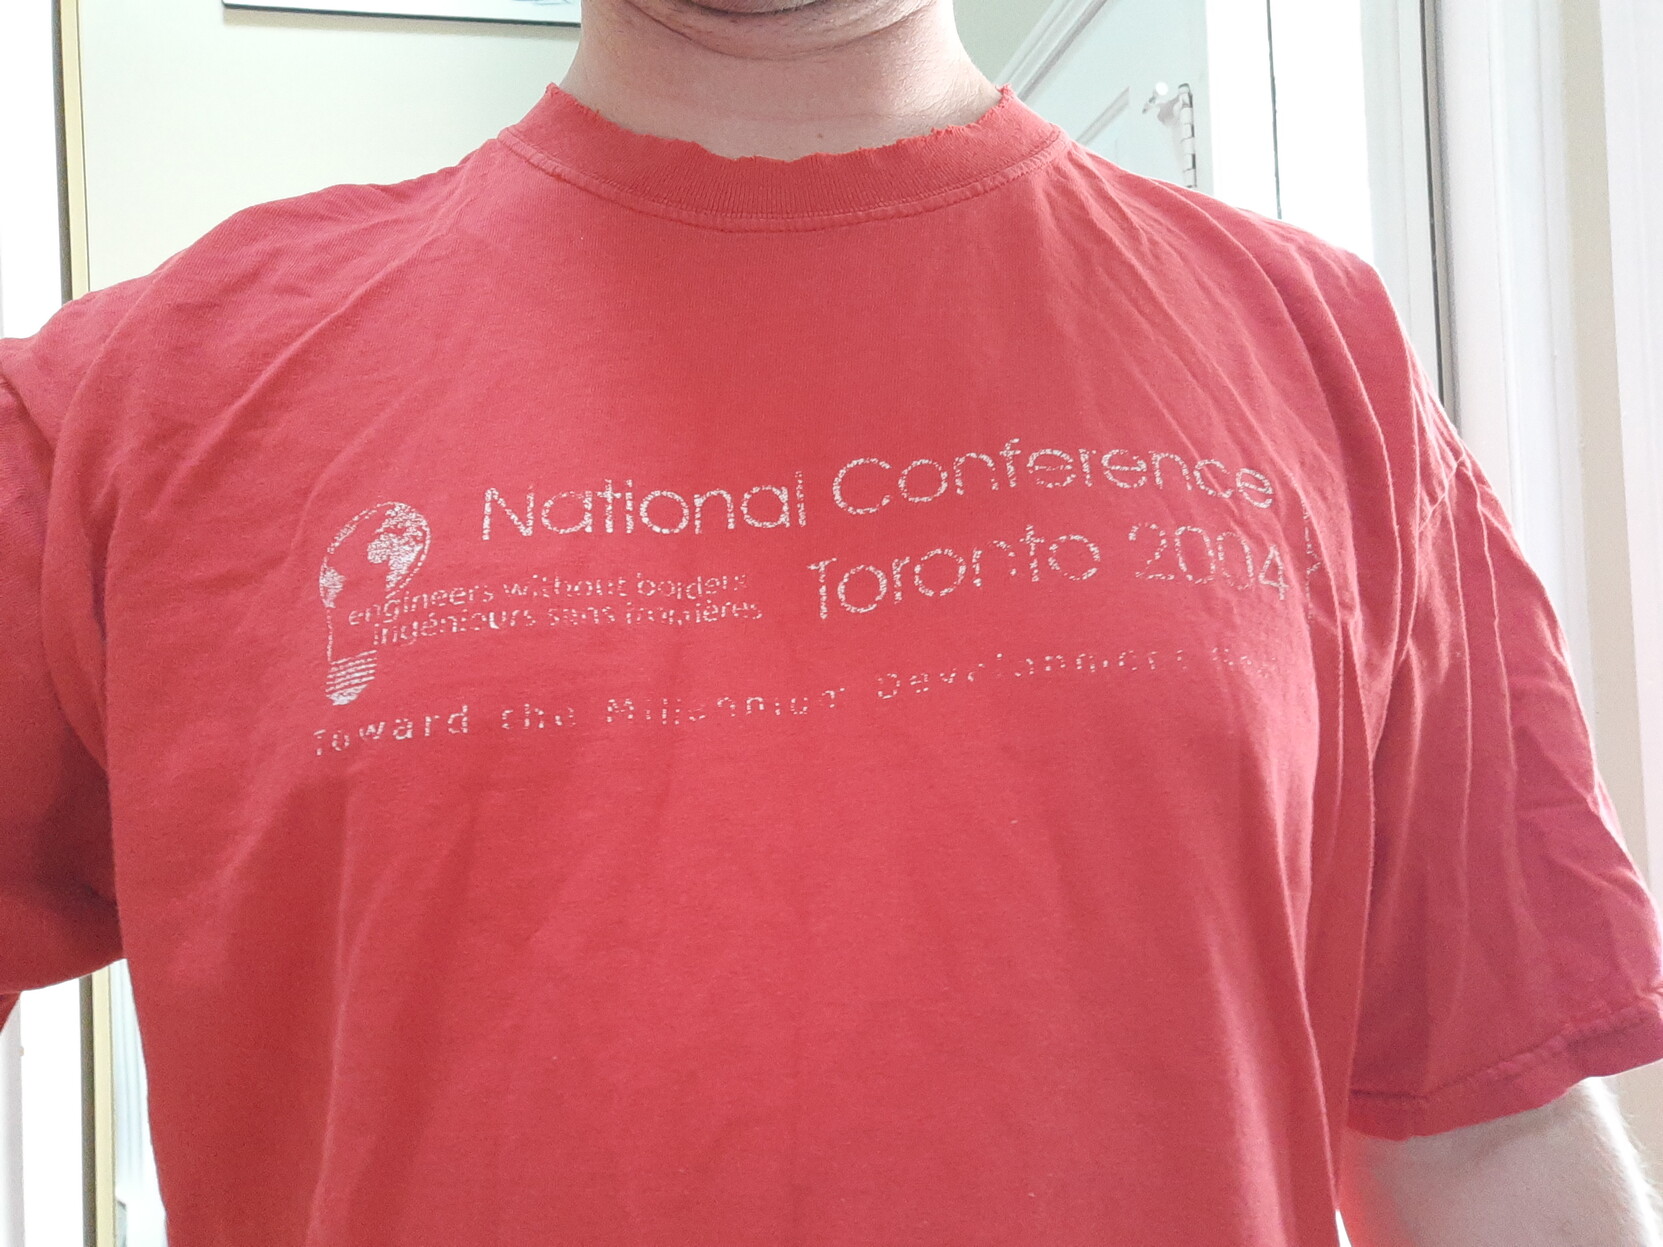 Faded red Tshirt from the Engineers Without Borders National Conference in Toronto 

2004